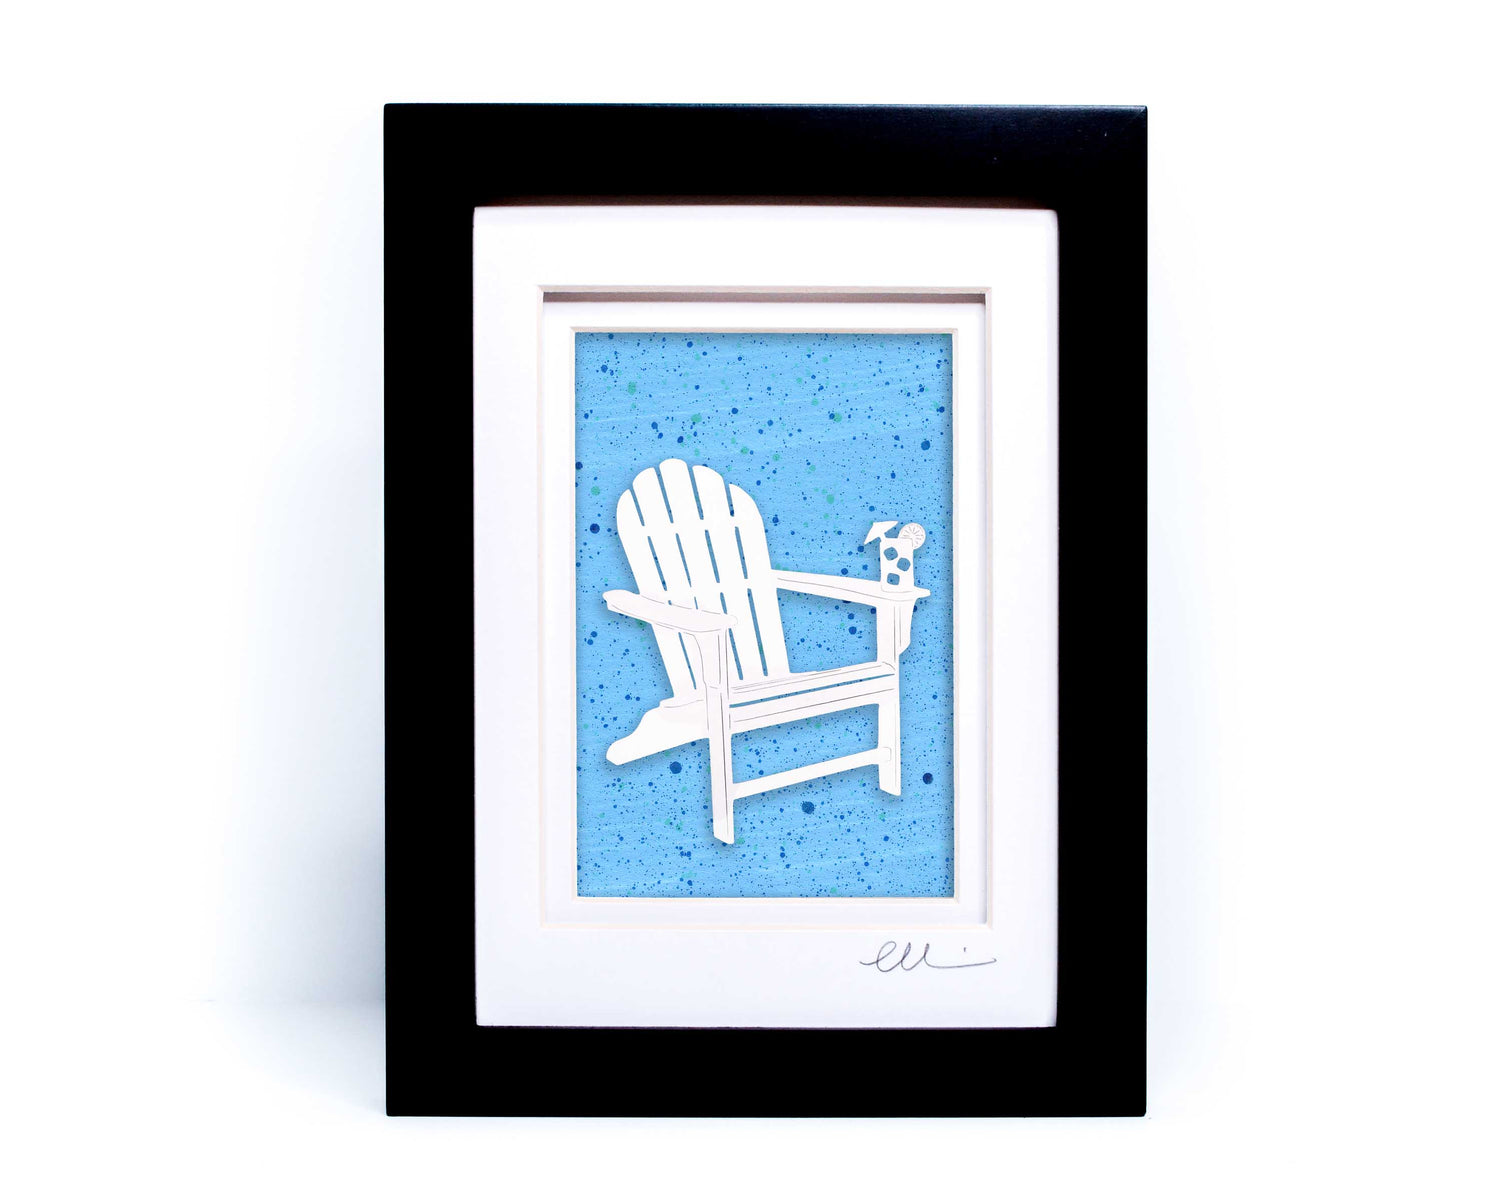 White beach adirondack chair with drink on chair arm papercut on hand painted light blue splattered background. 